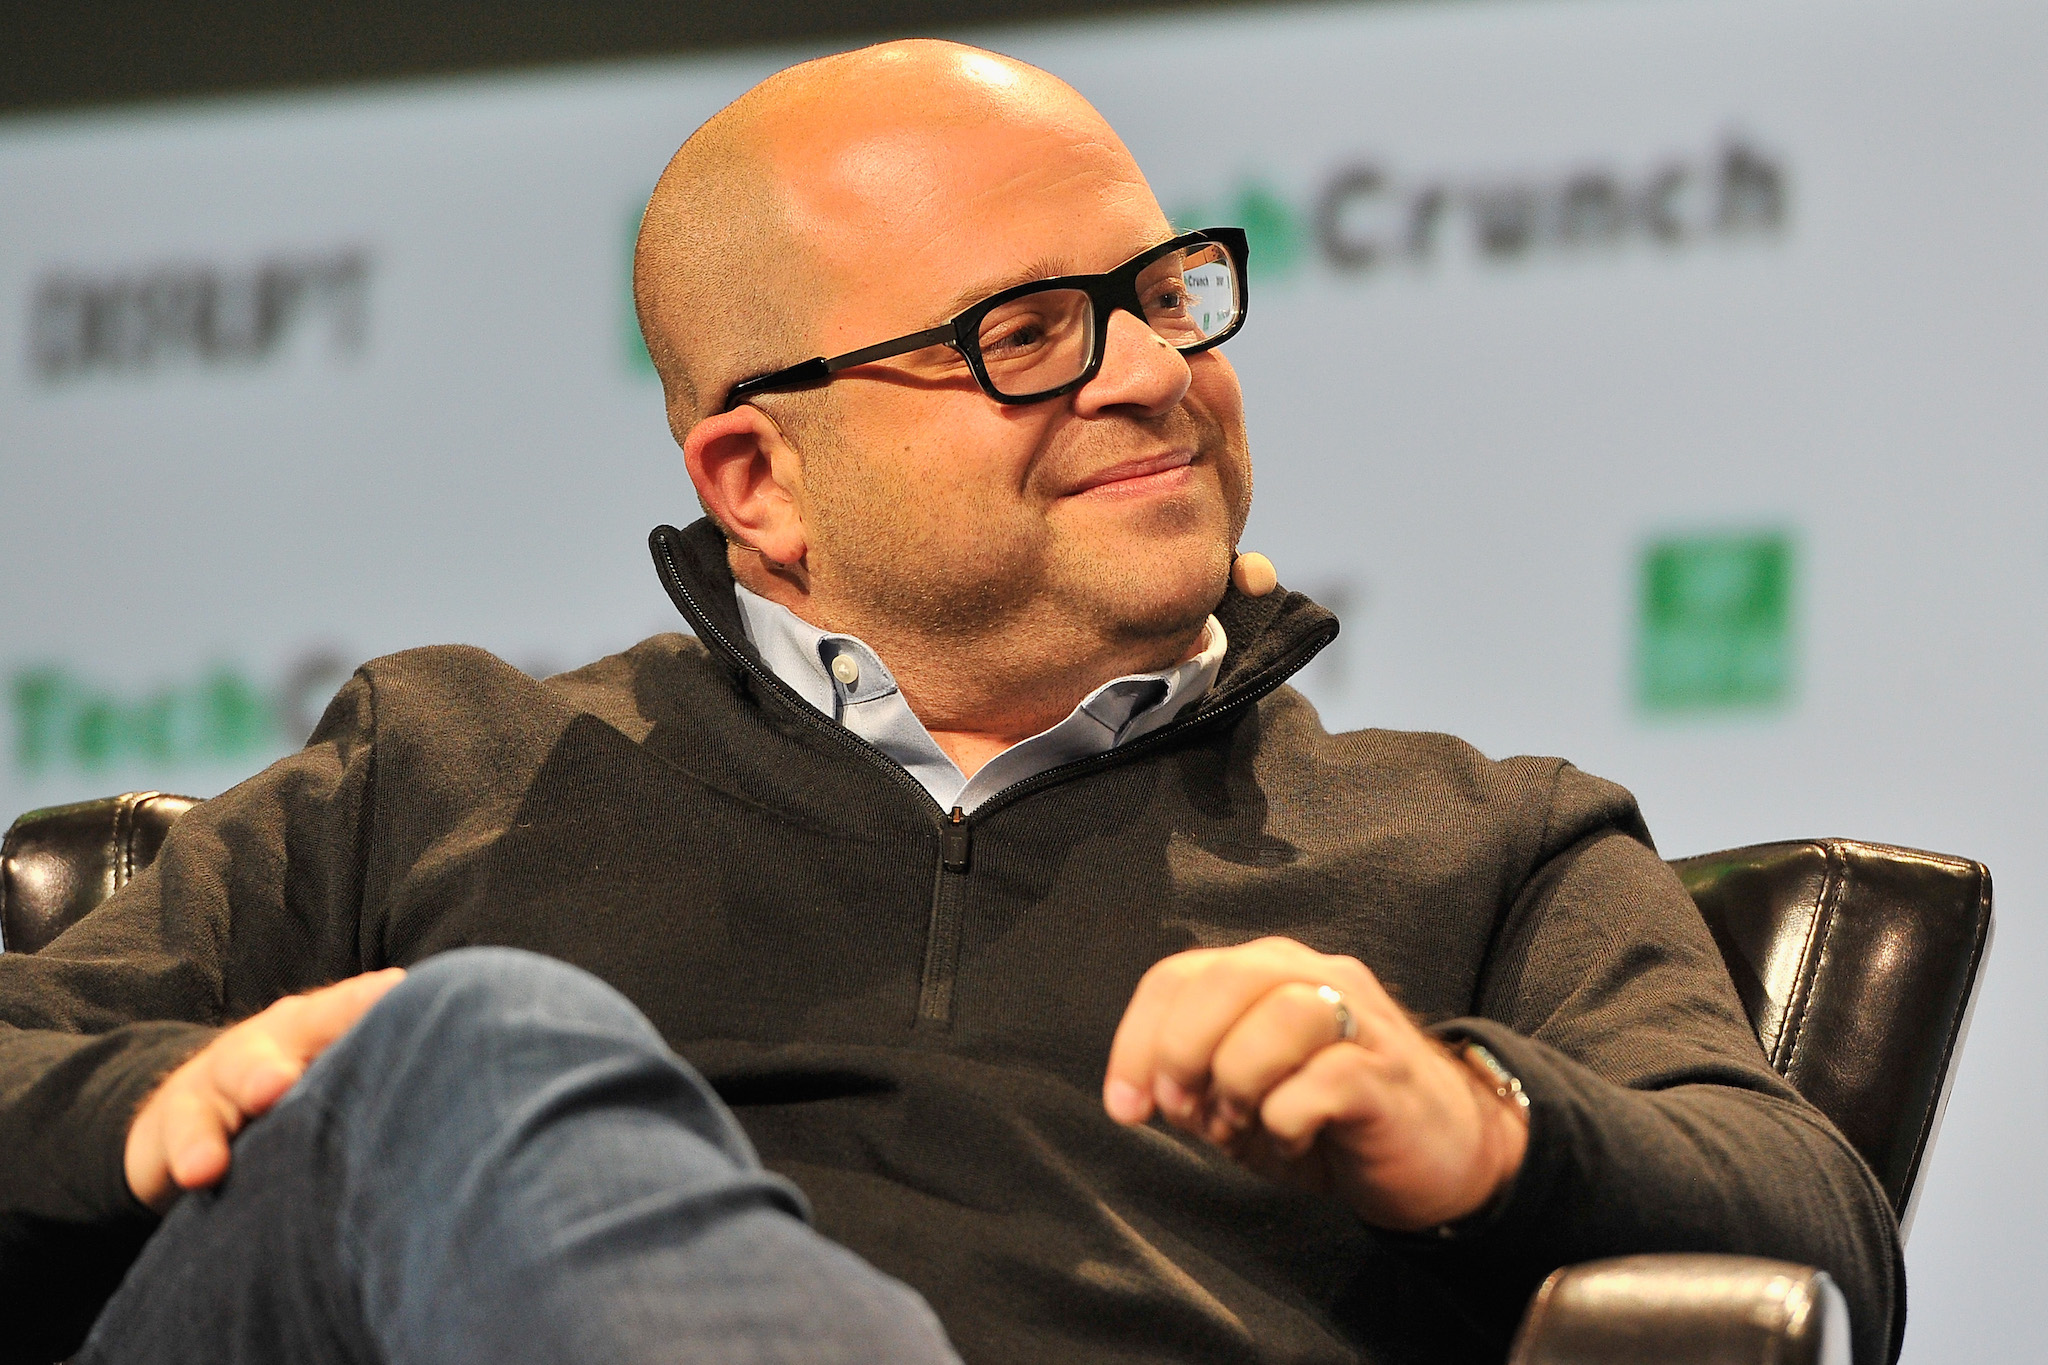 Twilio CEO speaks, wants technology companies to stay in the Bay Area